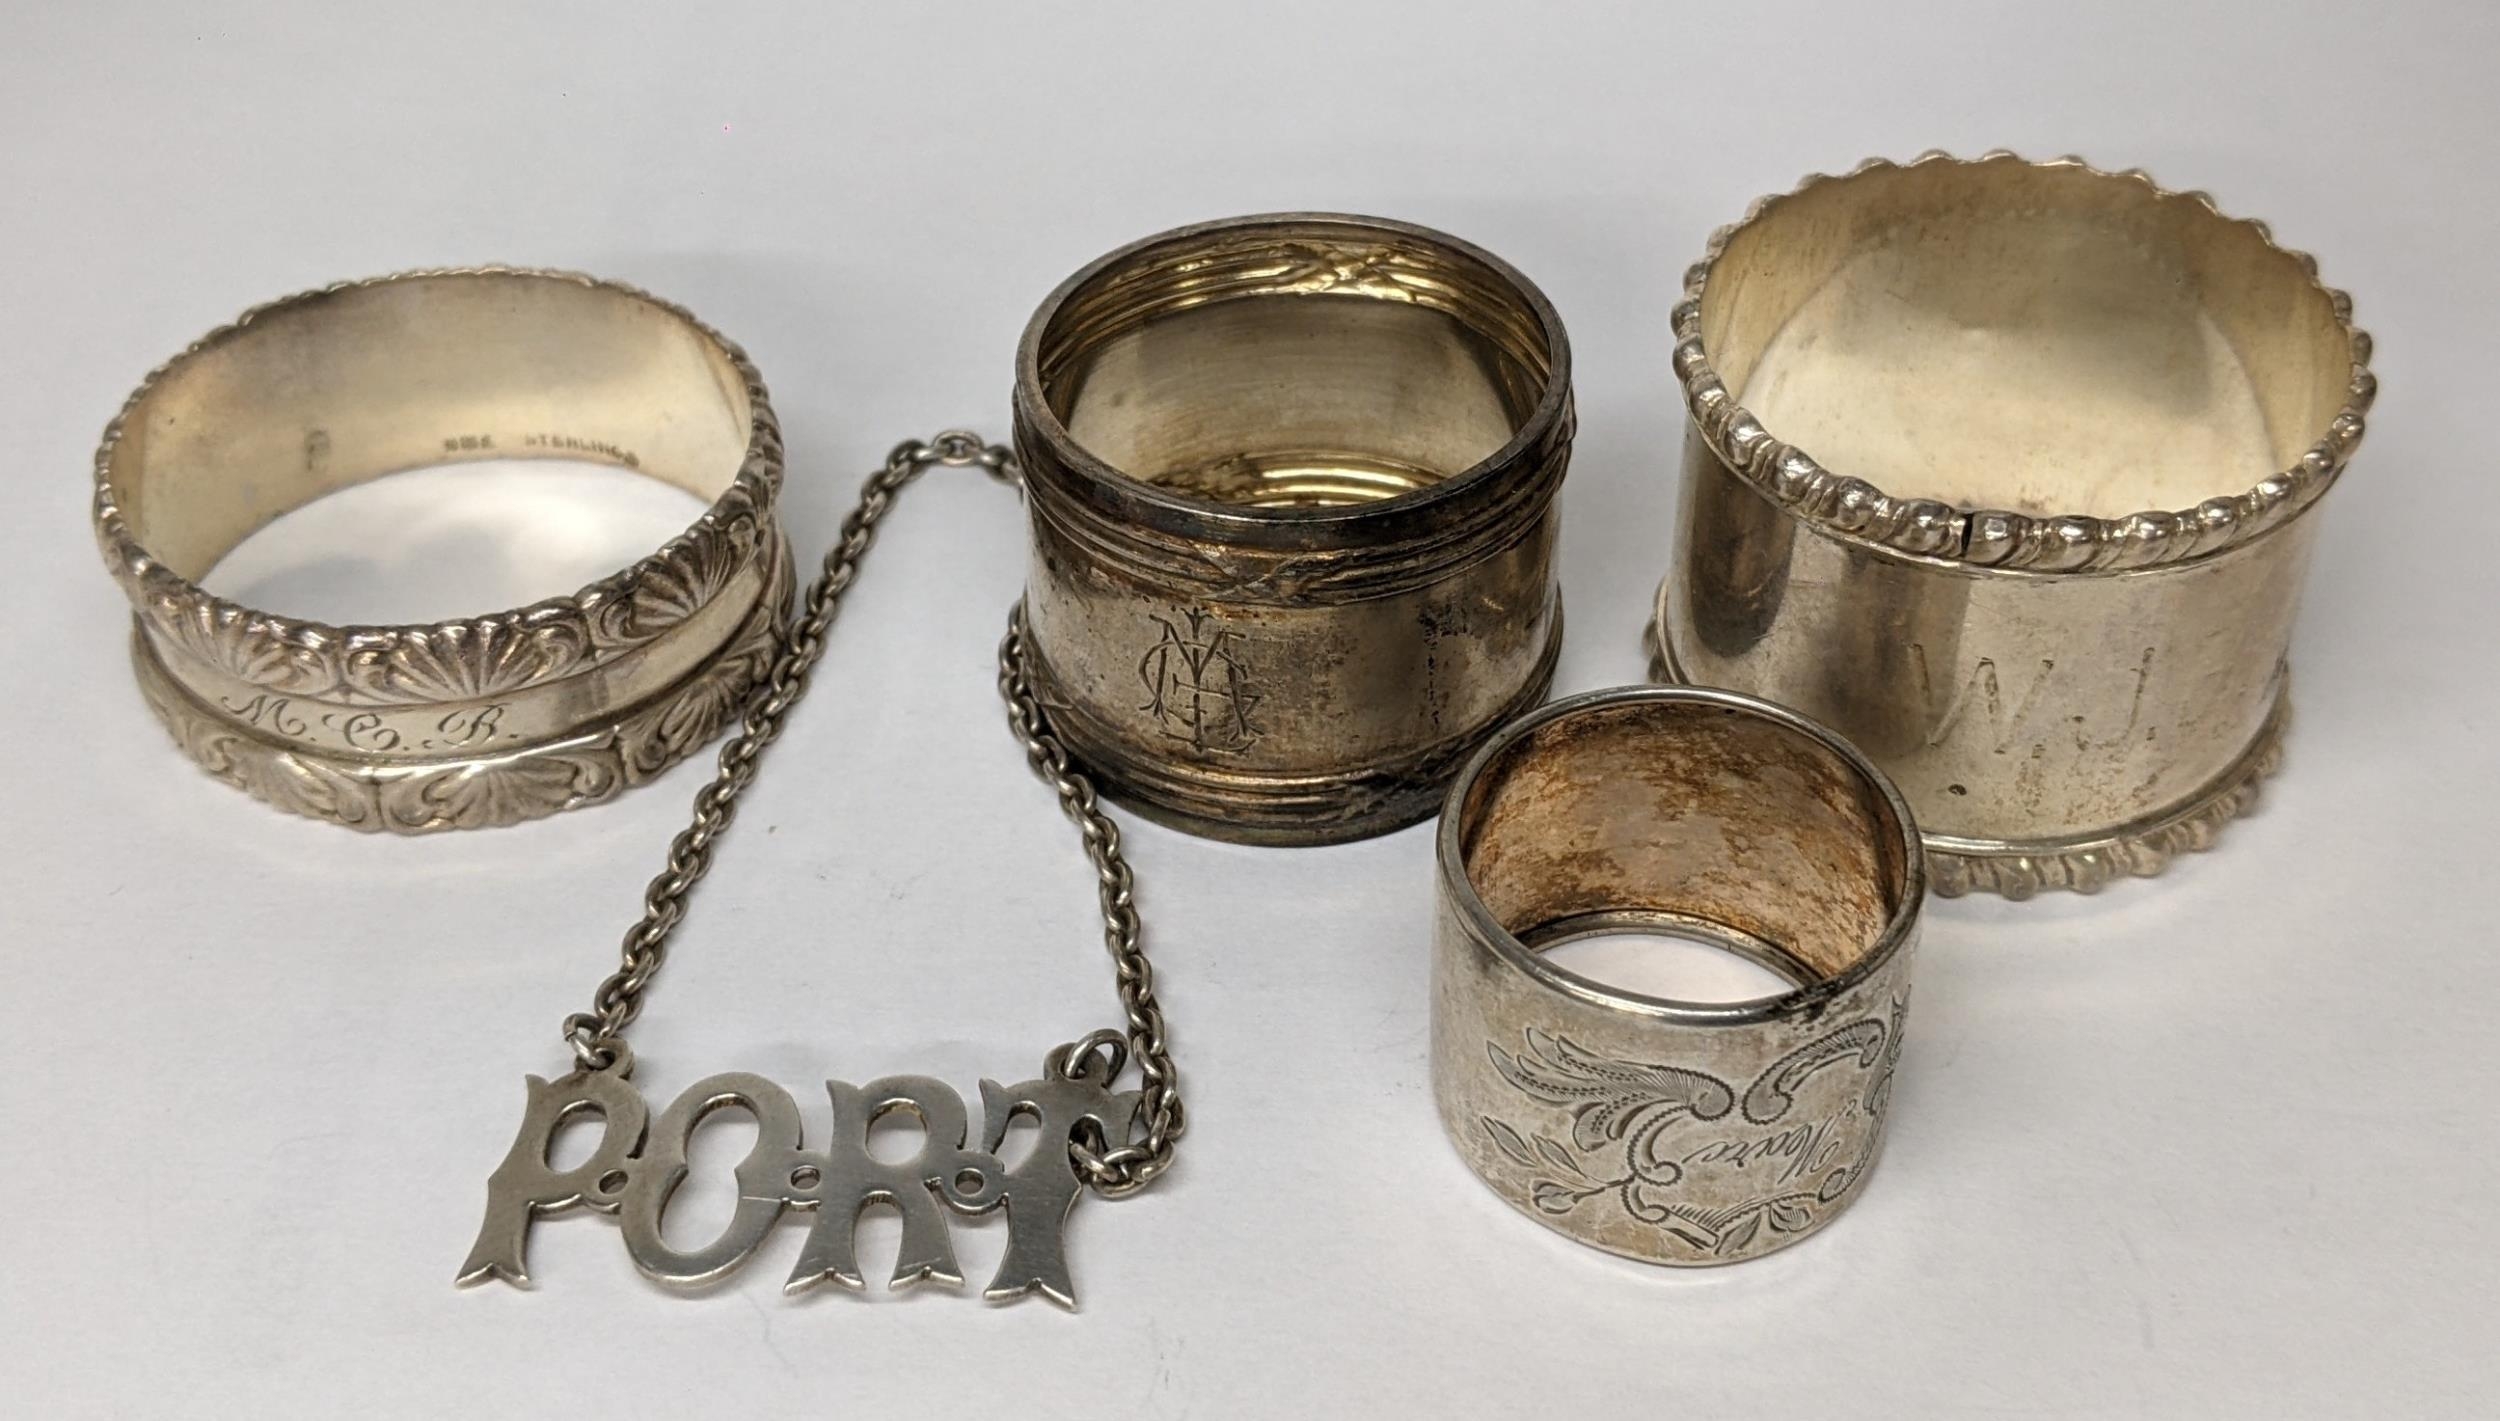 Two sterling silver napkin rings together with two white metal smaller napkin rings, and a port